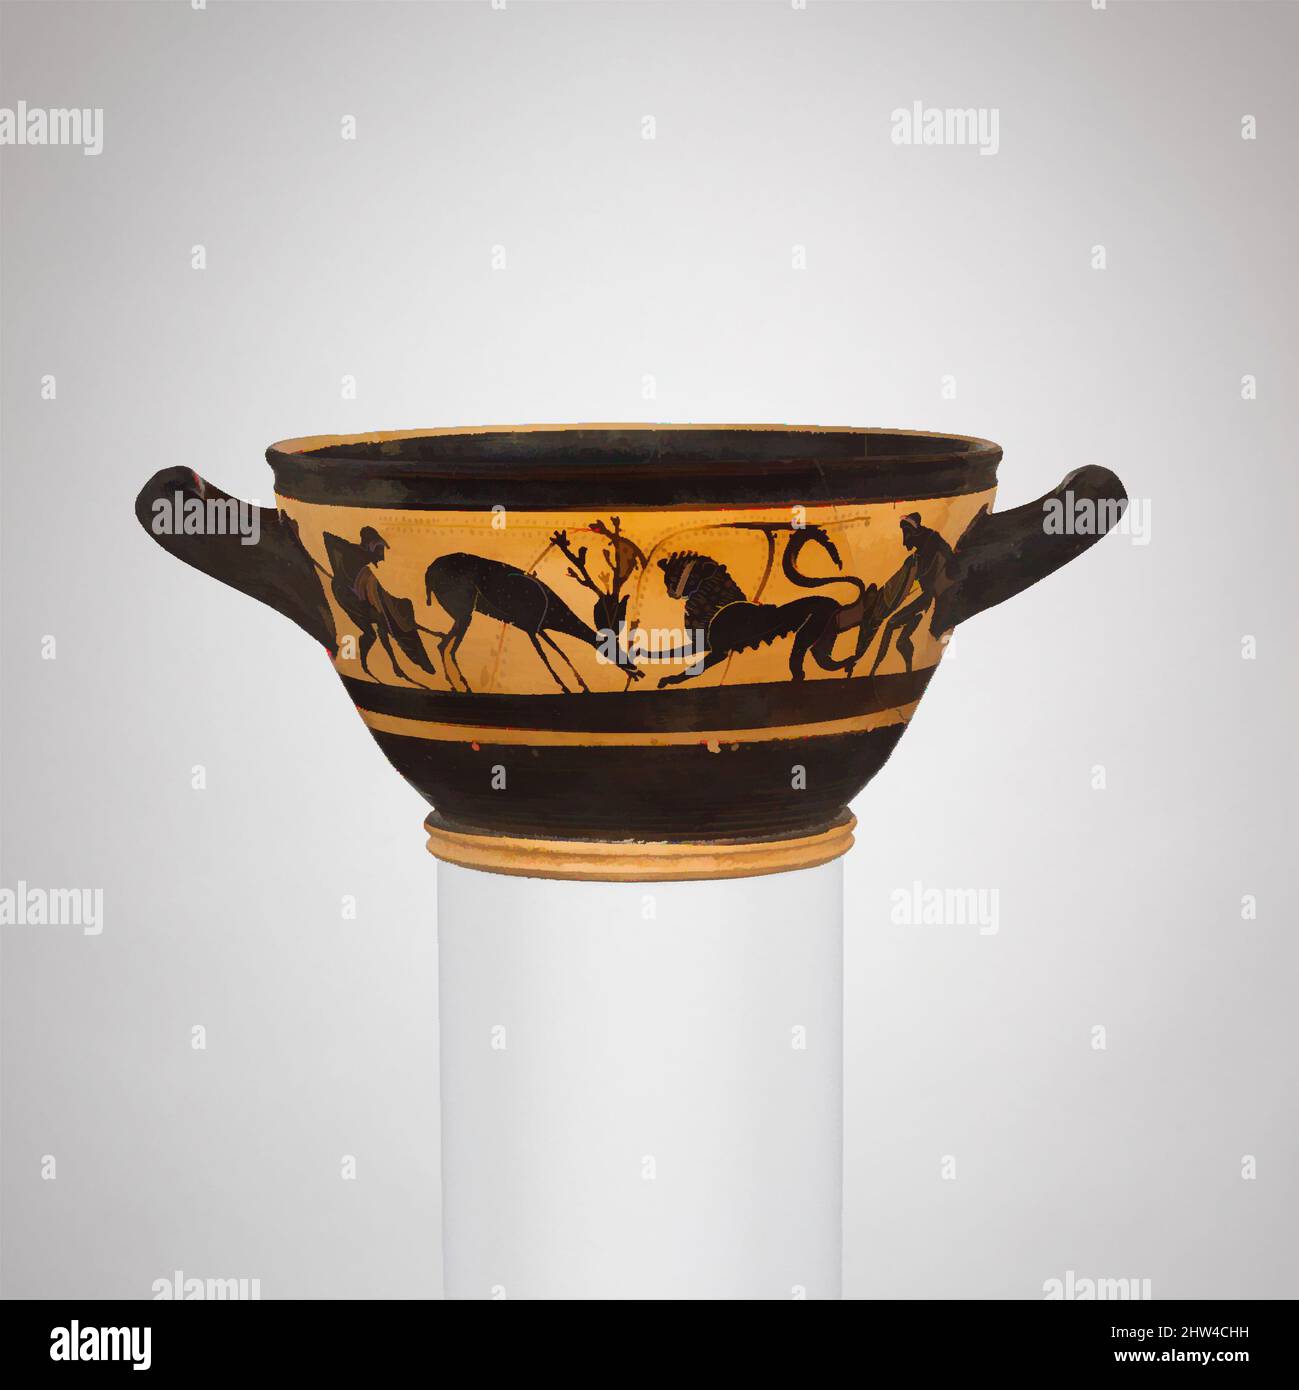 Art inspired by Terracotta skyphos (deep drinking cup), Archaic, ca. 500 B.C., Greek, Attic, Terracotta; black-figure, H. 4 3/16 in. (10.6 cm), Vases, Obverse, between hunters, lioness felling fallow deer, Reverse, between hunters, lion felling deer. This vase gives noteworthy, Classic works modernized by Artotop with a splash of modernity. Shapes, color and value, eye-catching visual impact on art. Emotions through freedom of artworks in a contemporary way. A timeless message pursuing a wildly creative new direction. Artists turning to the digital medium and creating the Artotop NFT Stock Photo